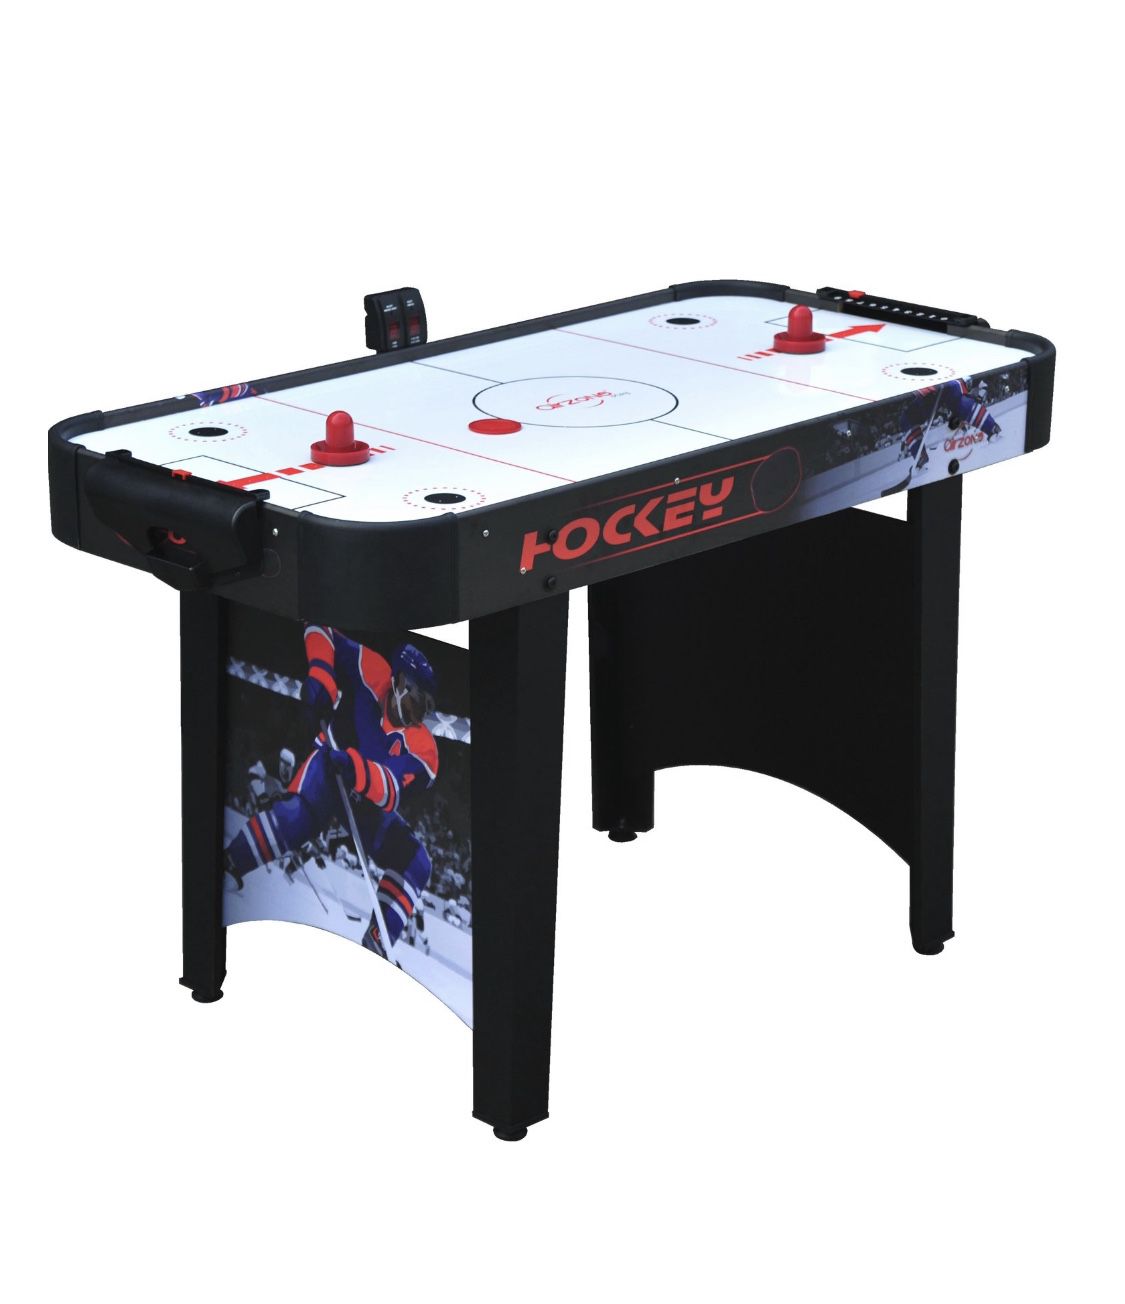 Airzone Play 48” Air Hockey Table with LED Scoring